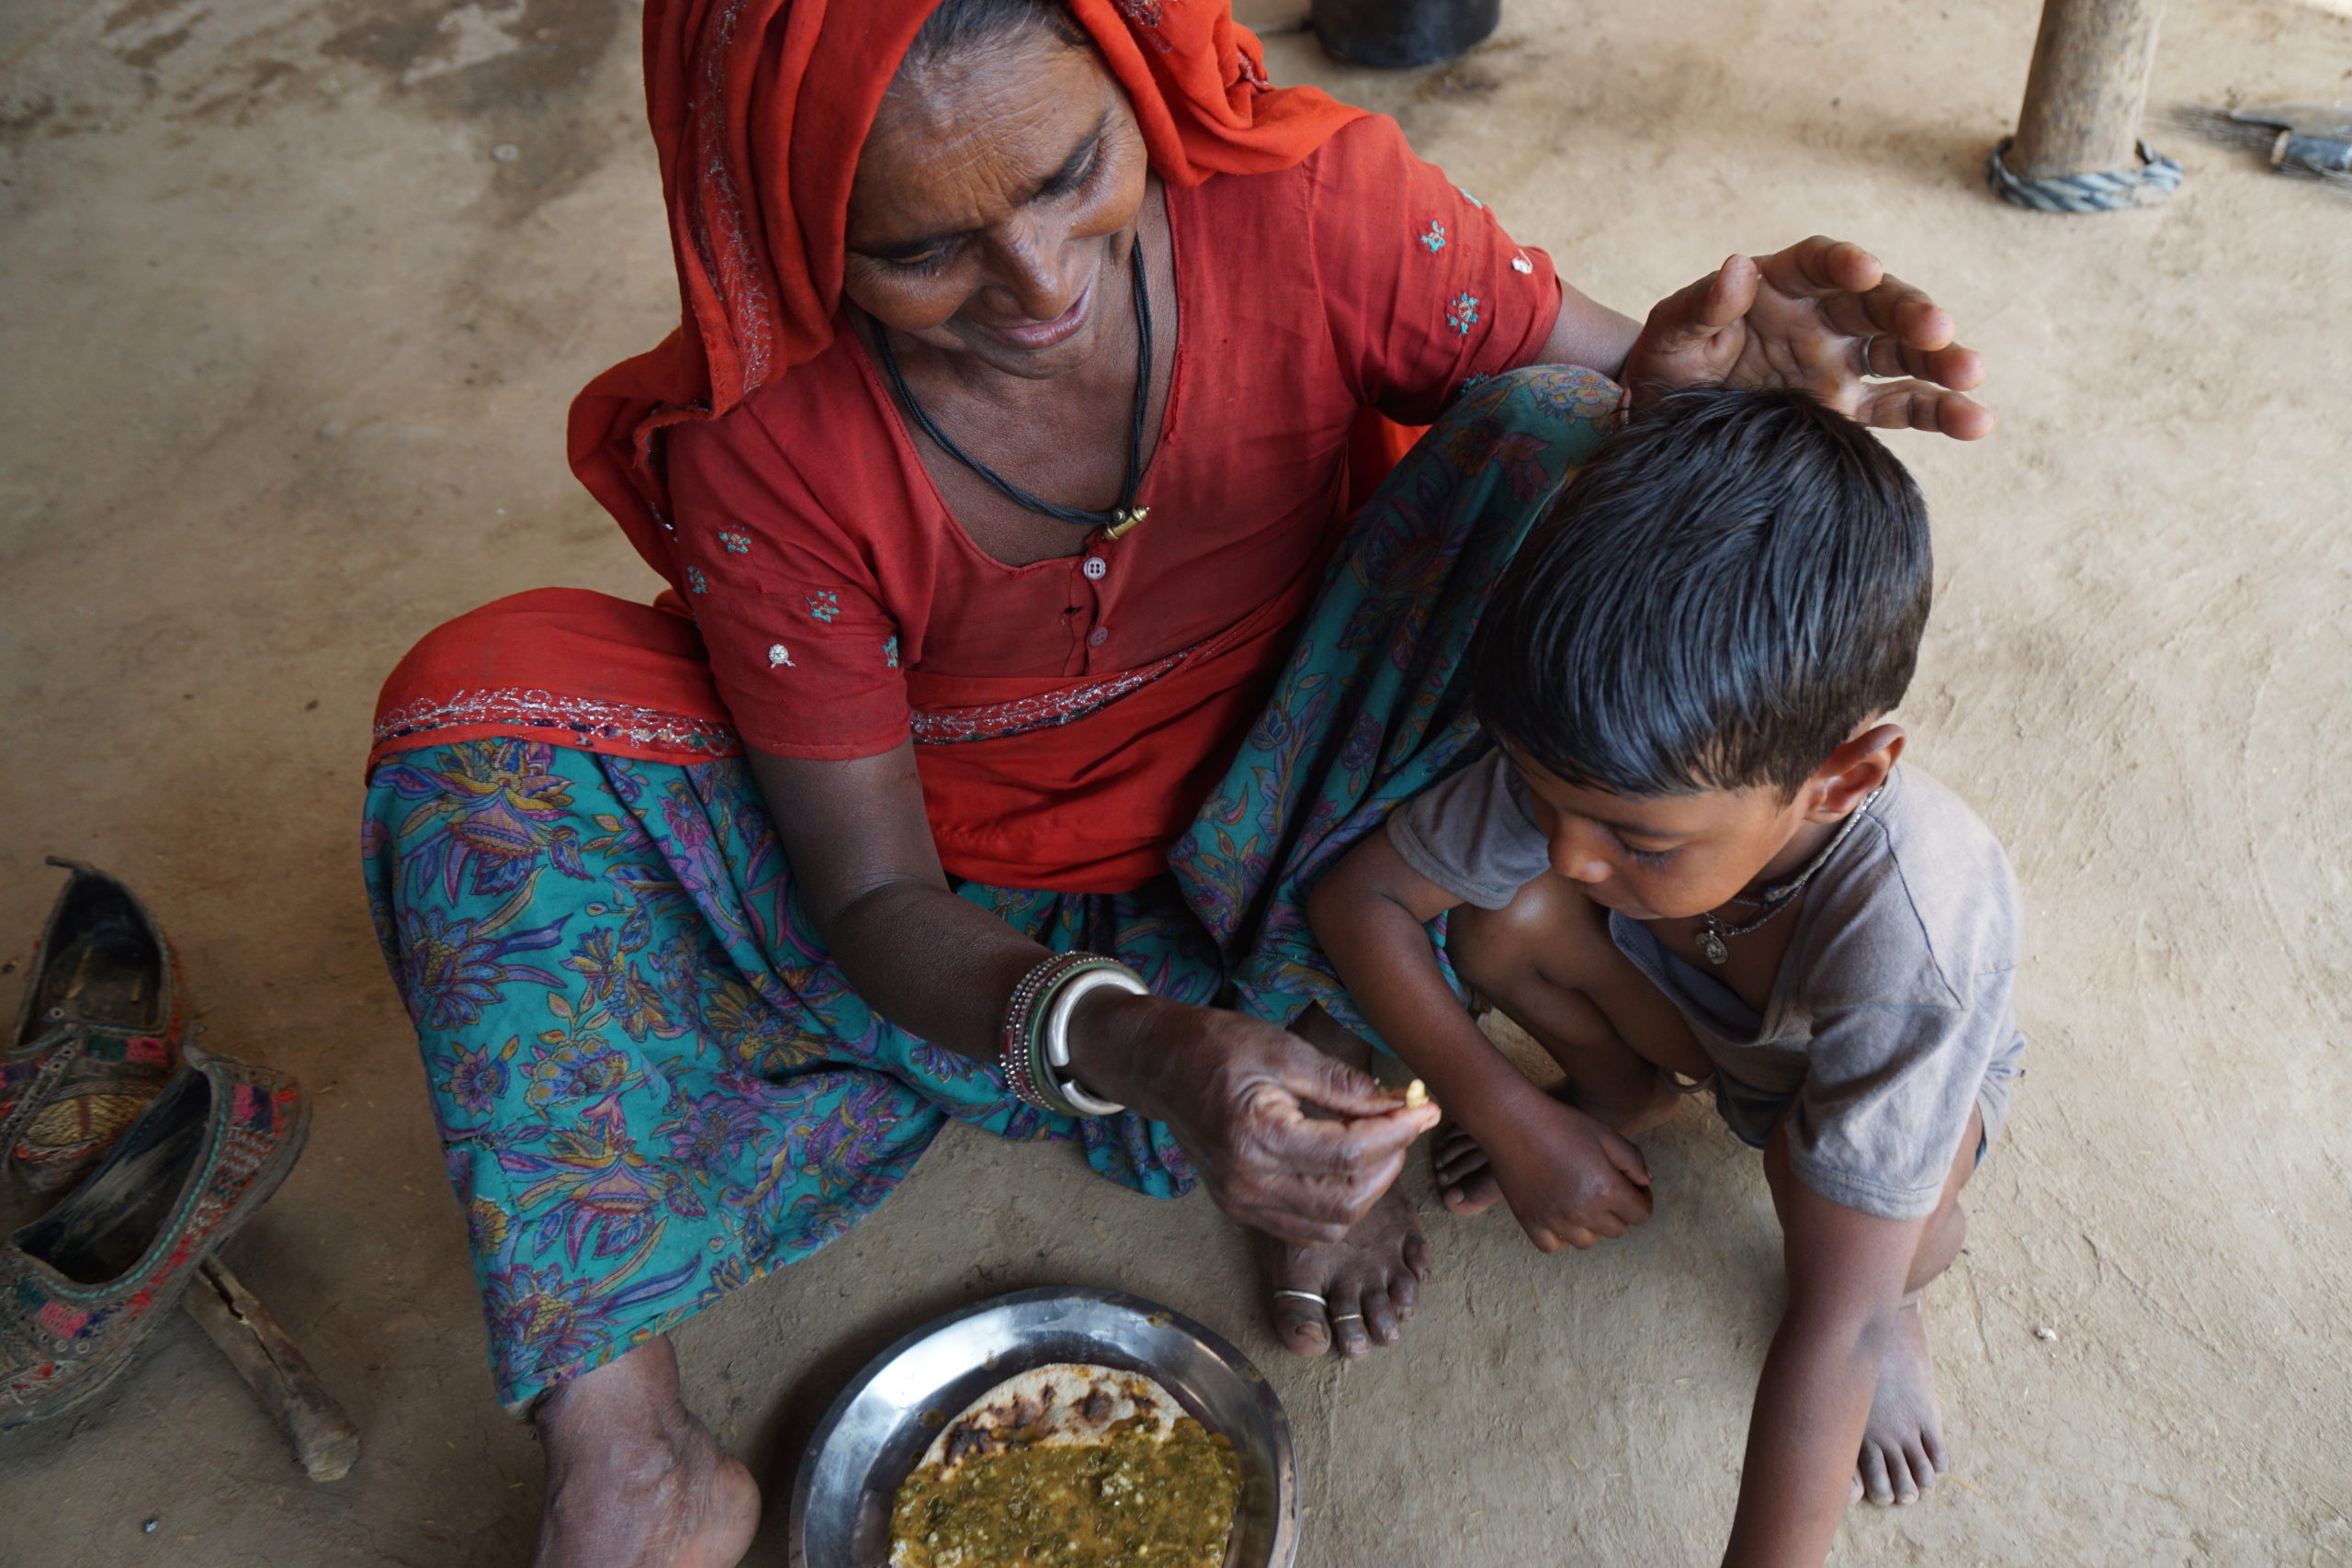 Malnutrition in India needs to tackled on a war-footing. NGOs can play a crucial role in this.